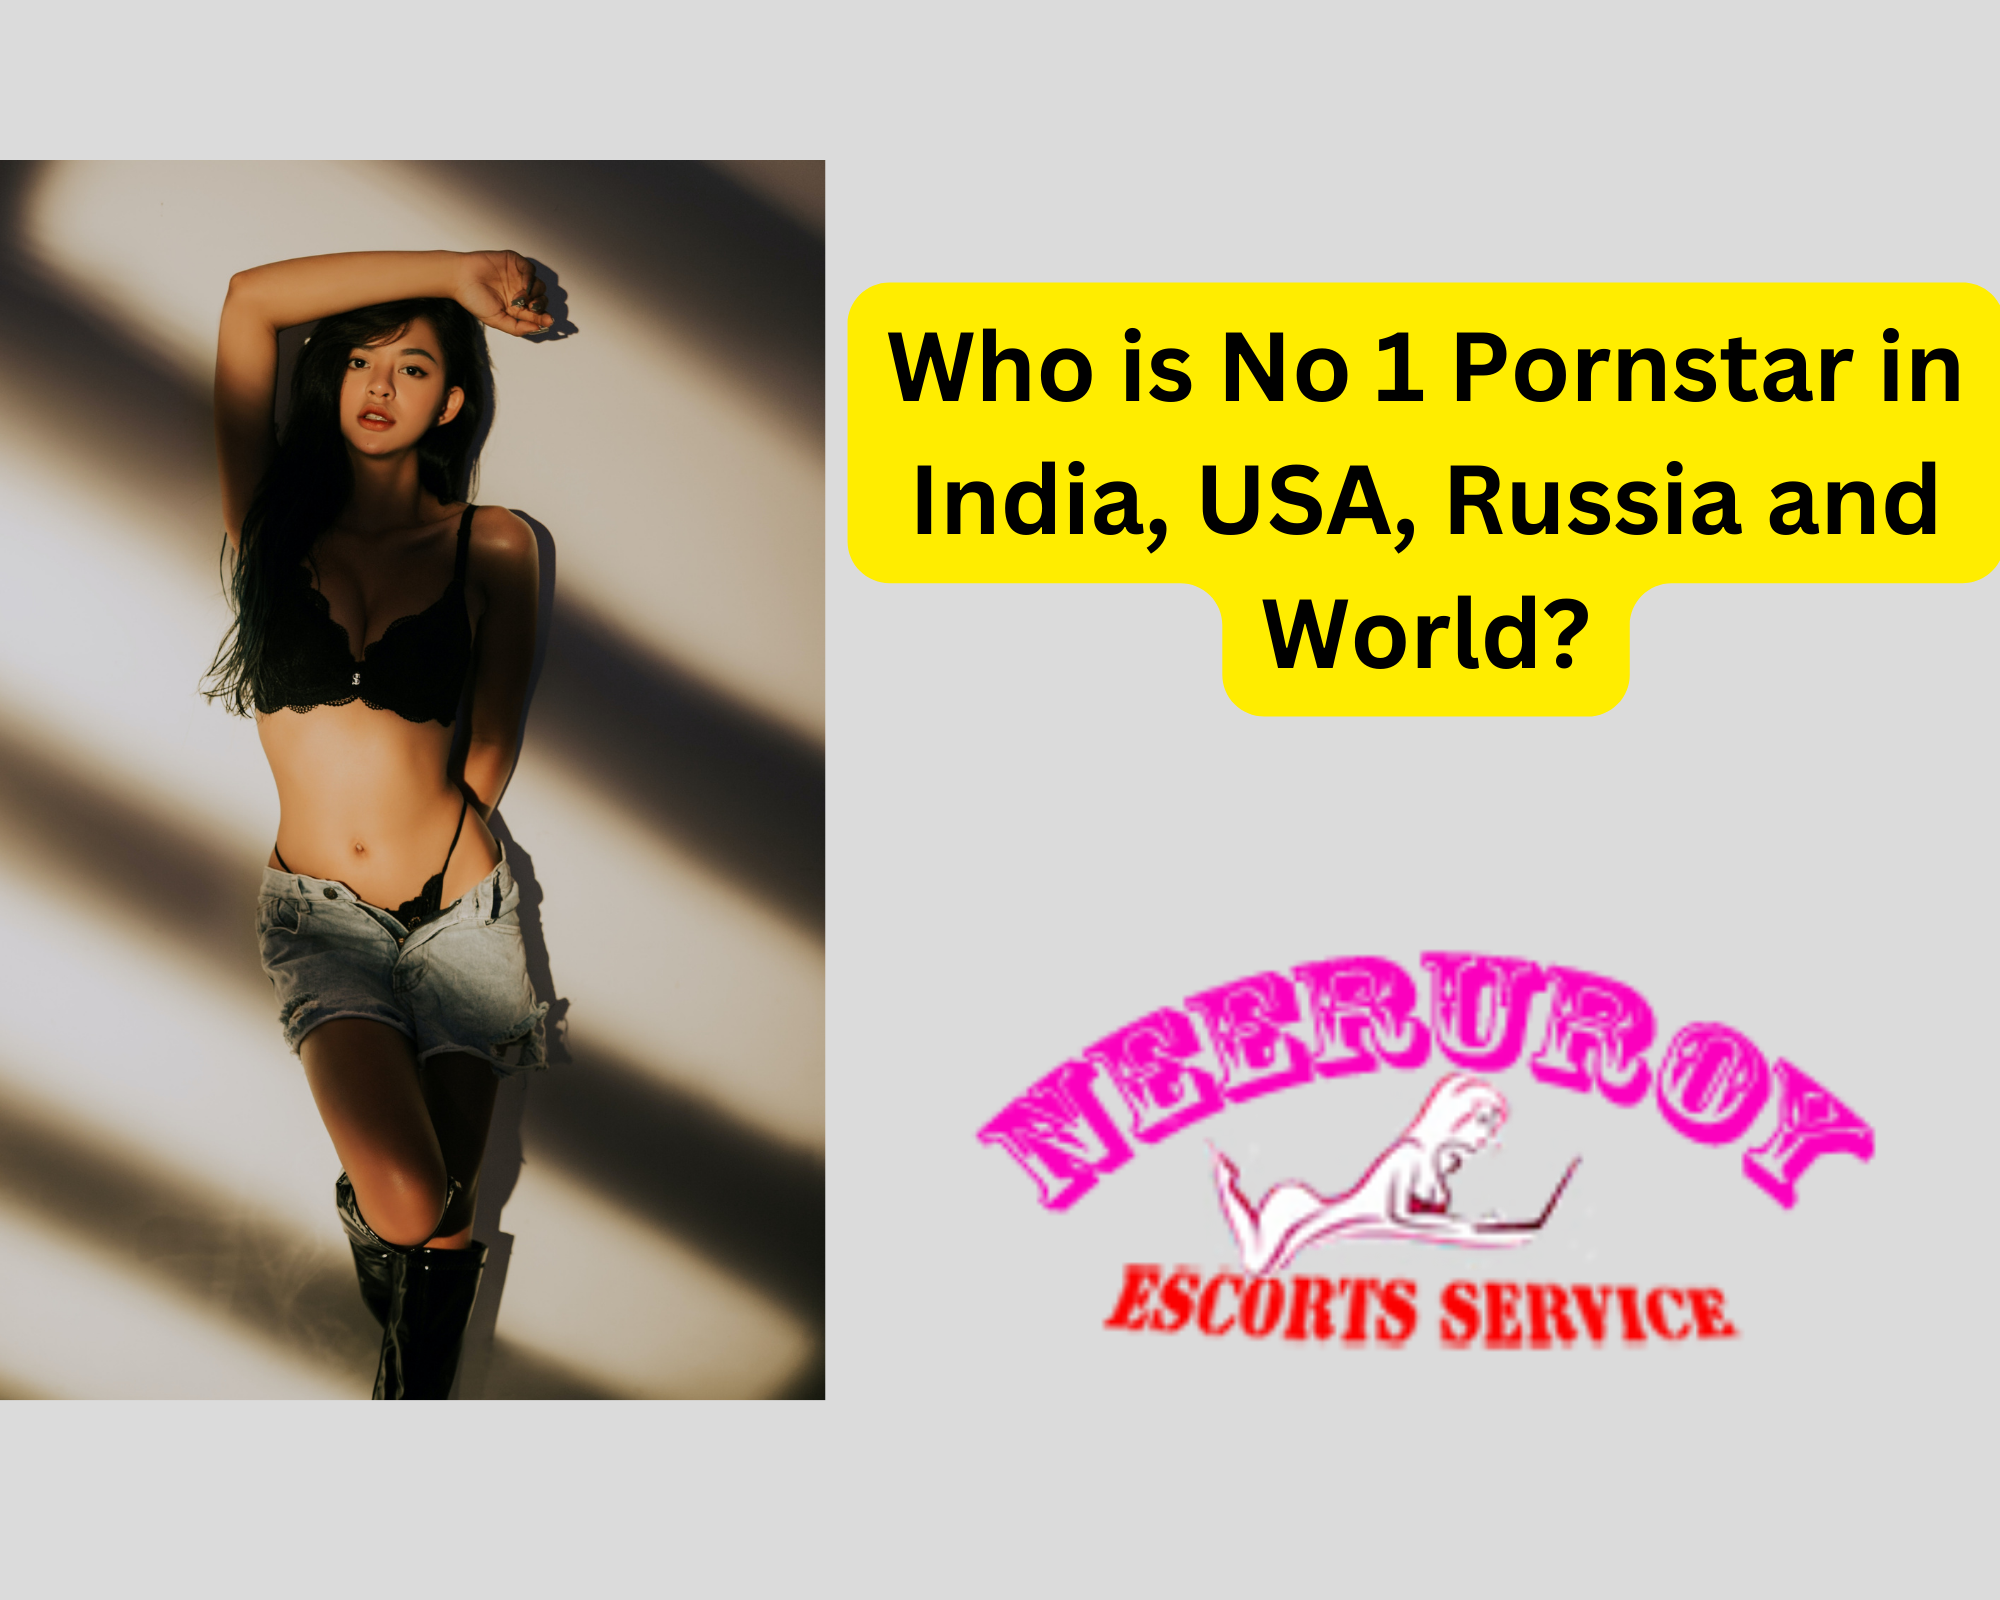 Who is No 1 Pornstar in India, USA, Russia and World